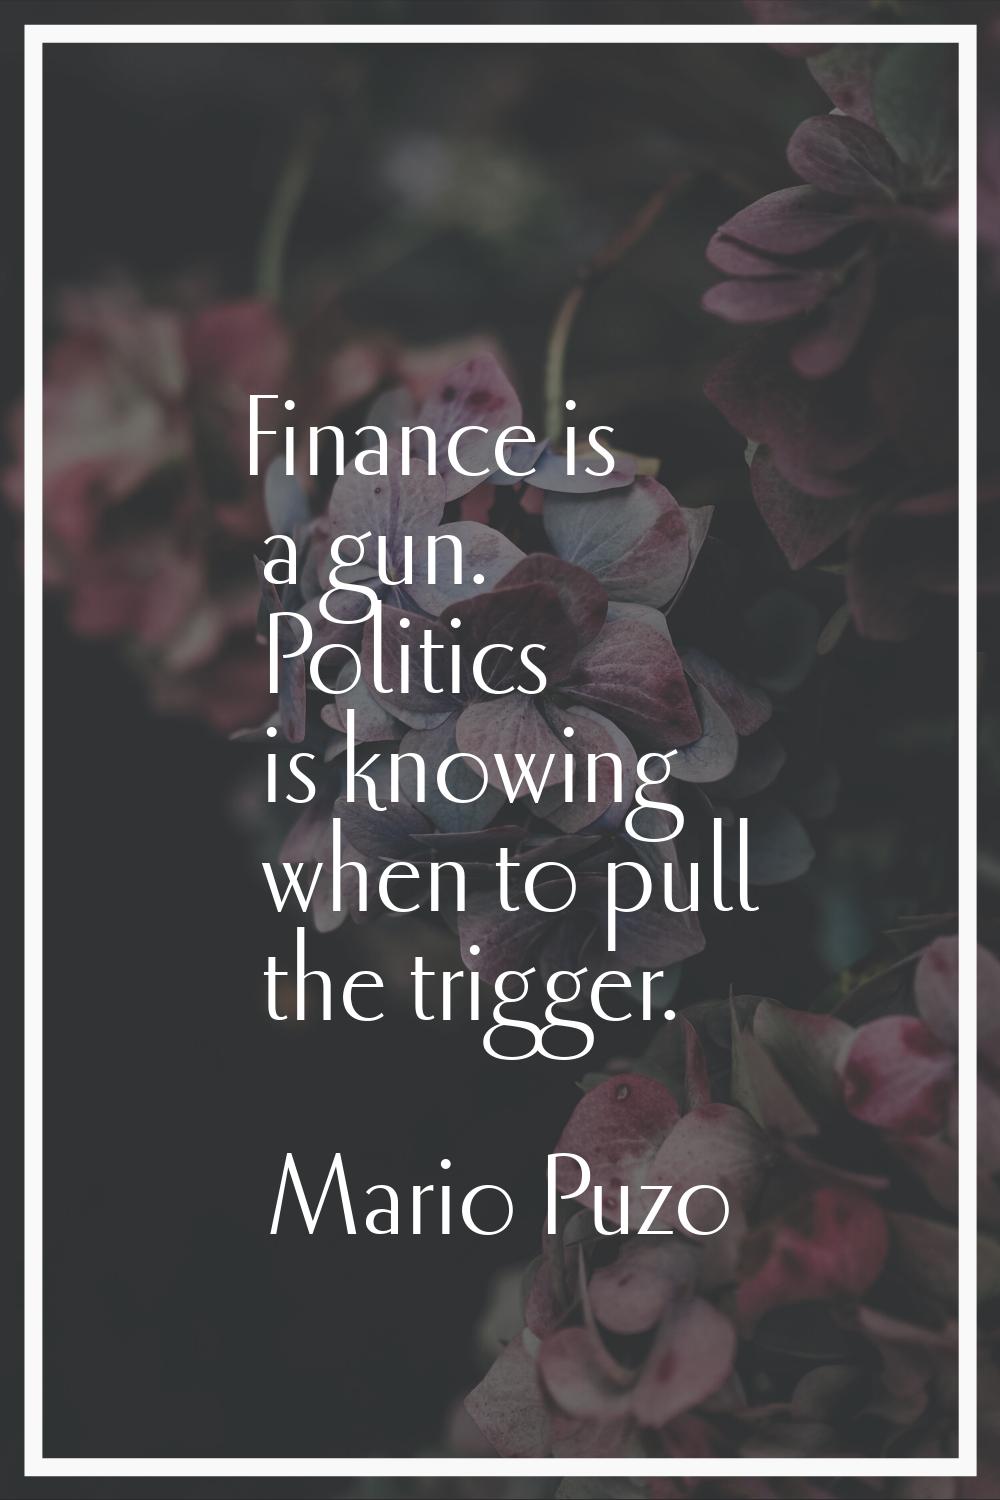 Finance is a gun. Politics is knowing when to pull the trigger.